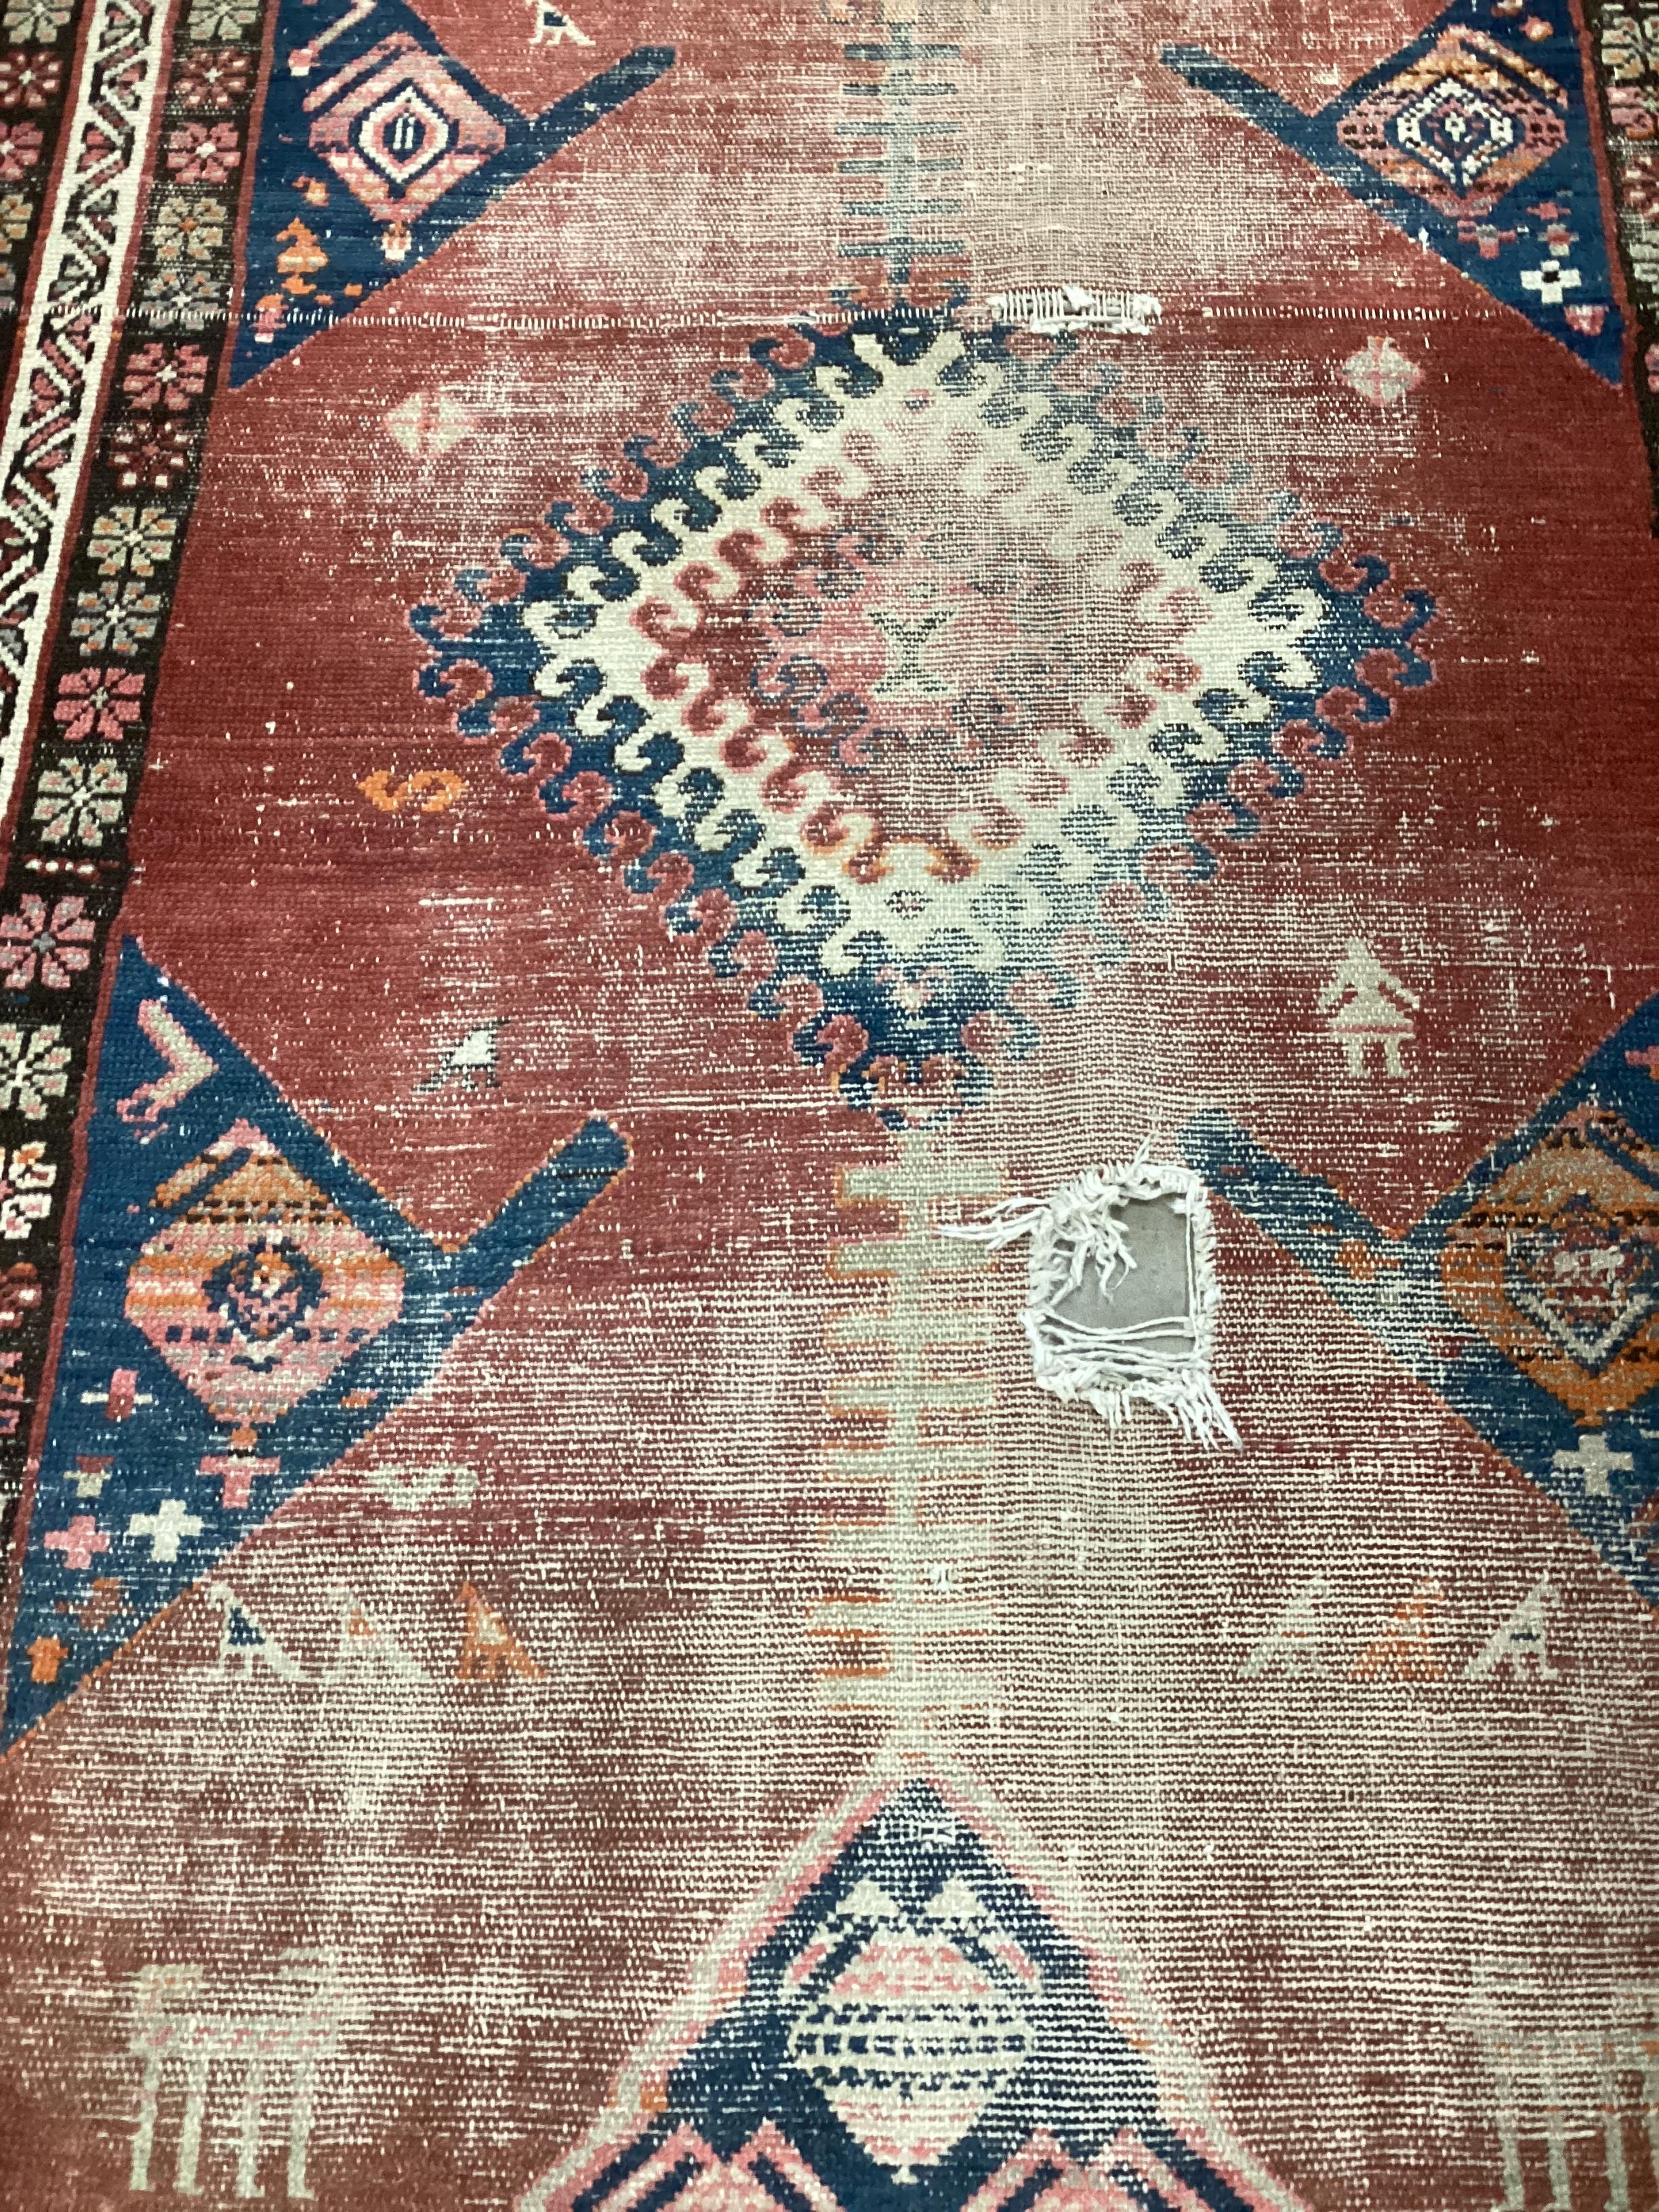 An Antique Caucasian brick red ground runner 336cm x 110cm, severely worn and holed